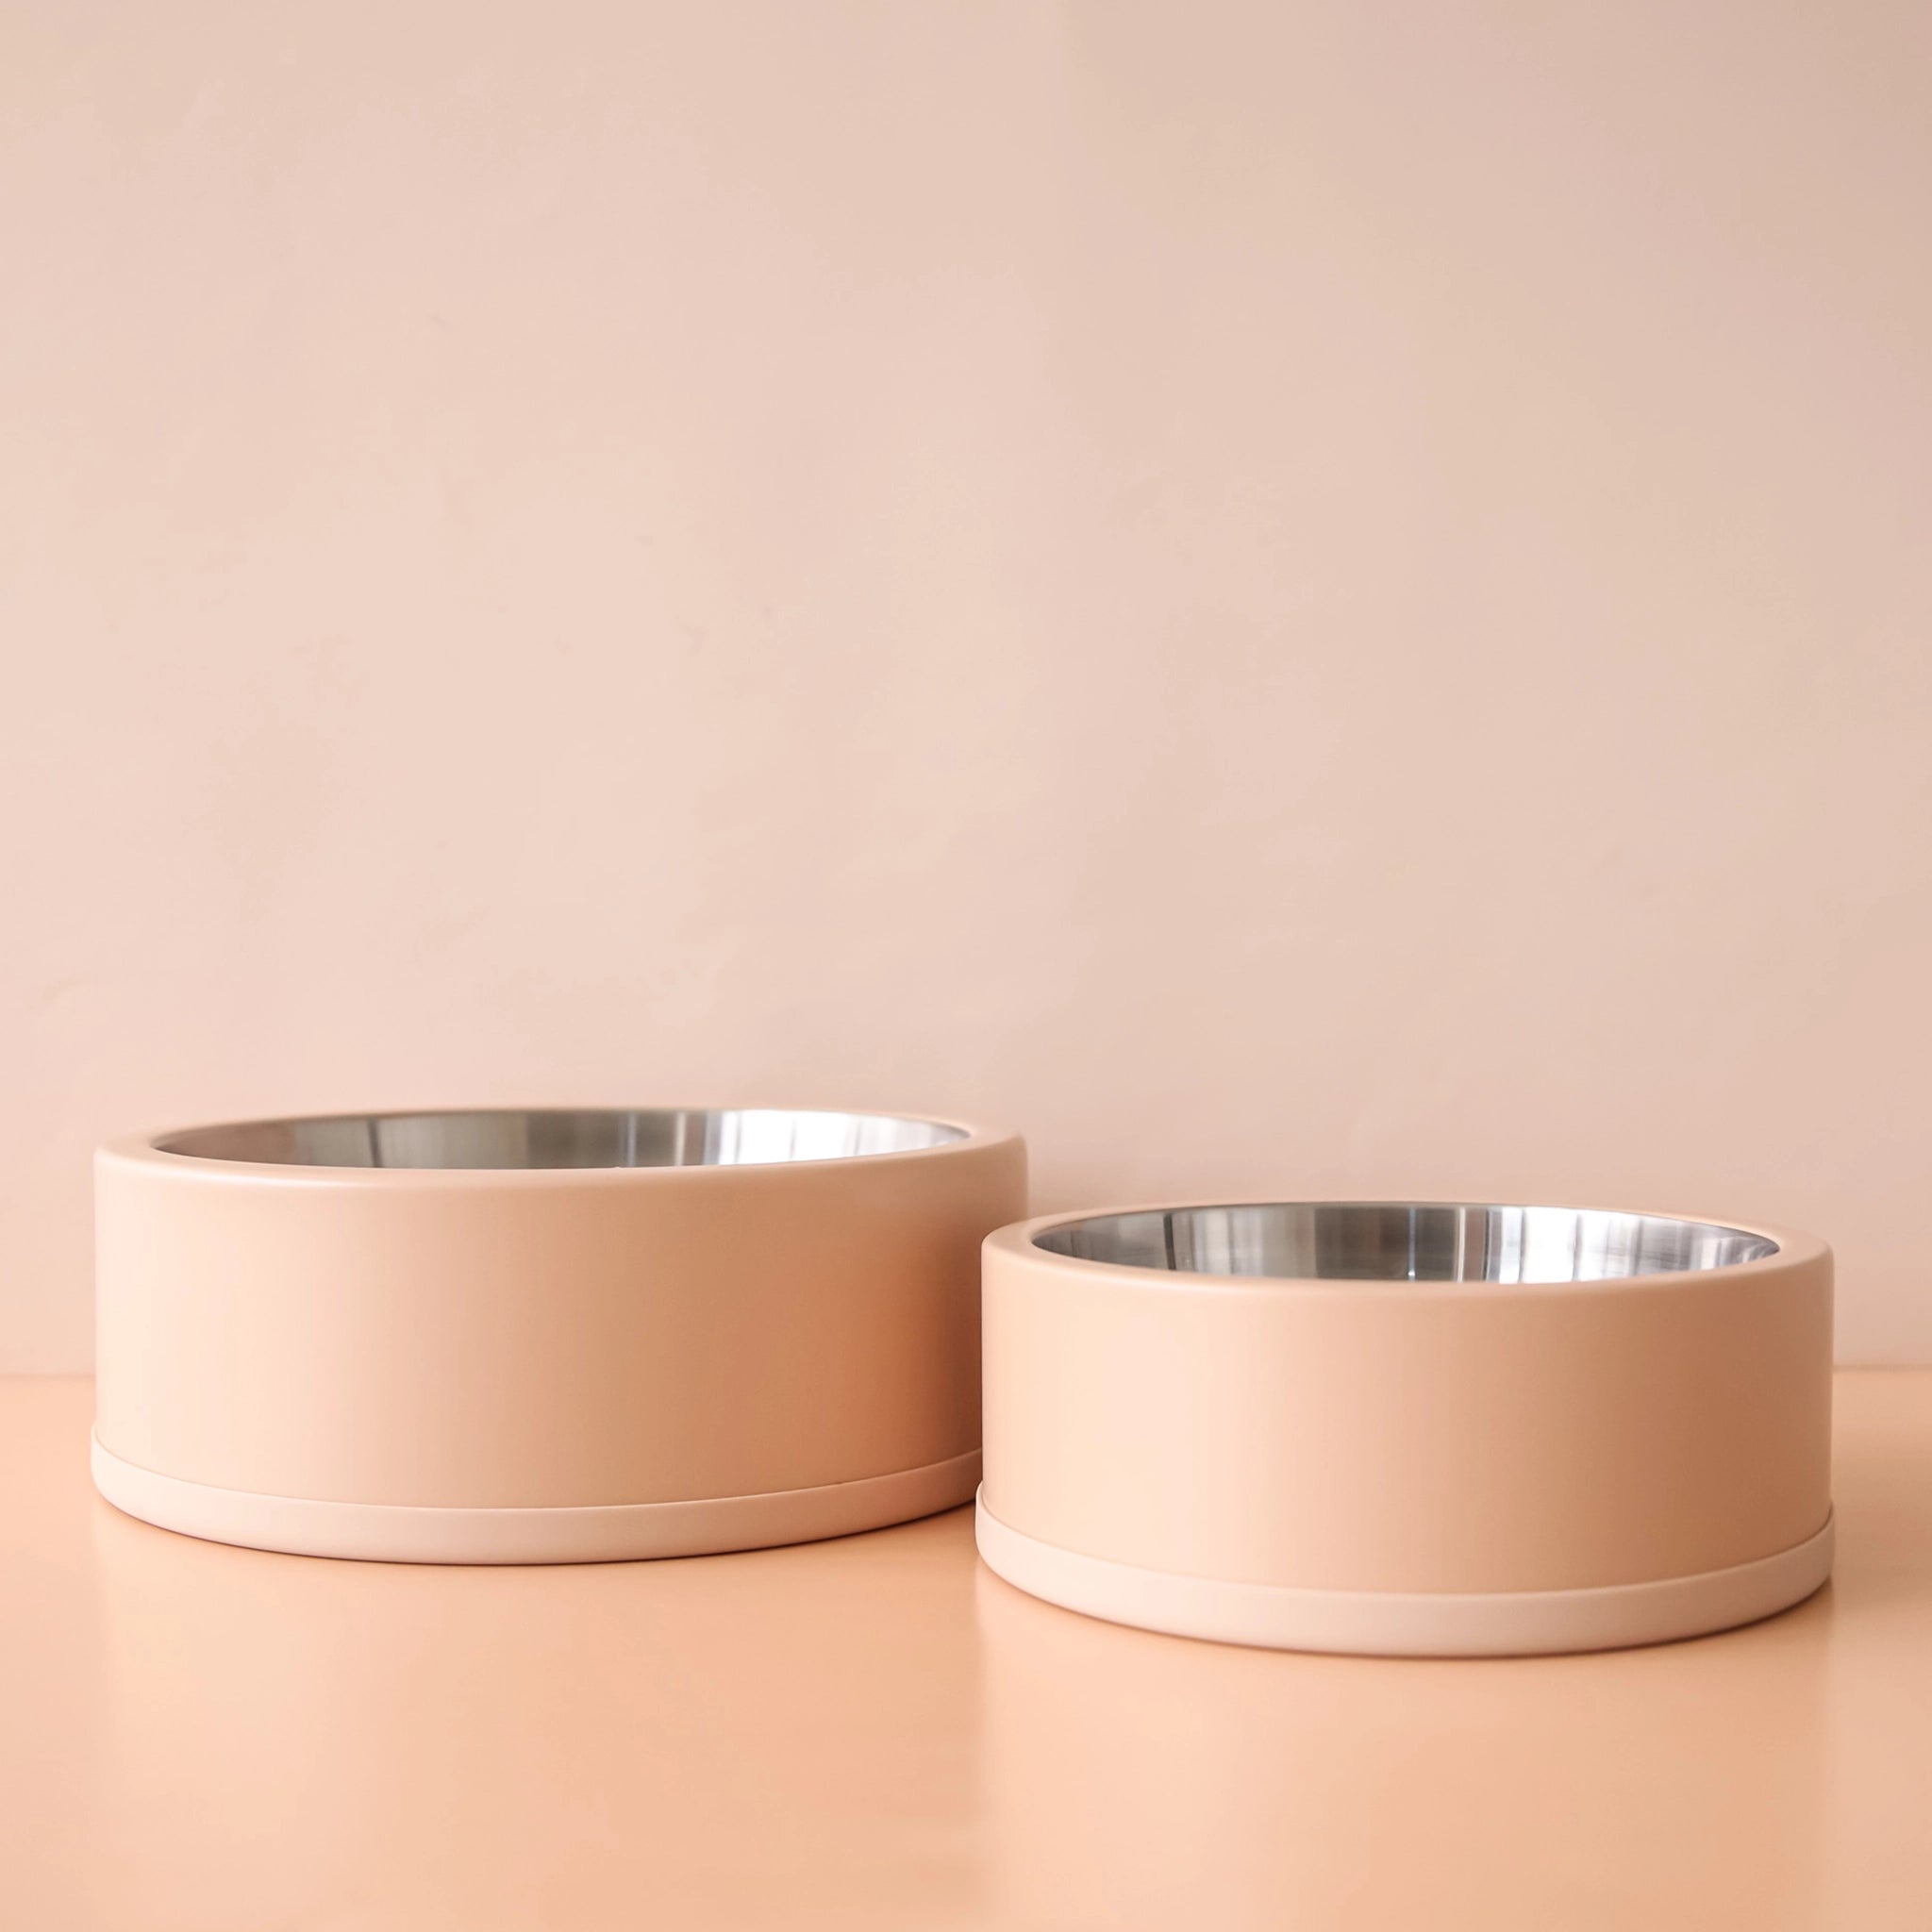 On a peachy background is two different sized dog bowls with stainless steel interiors and a tan exterior.